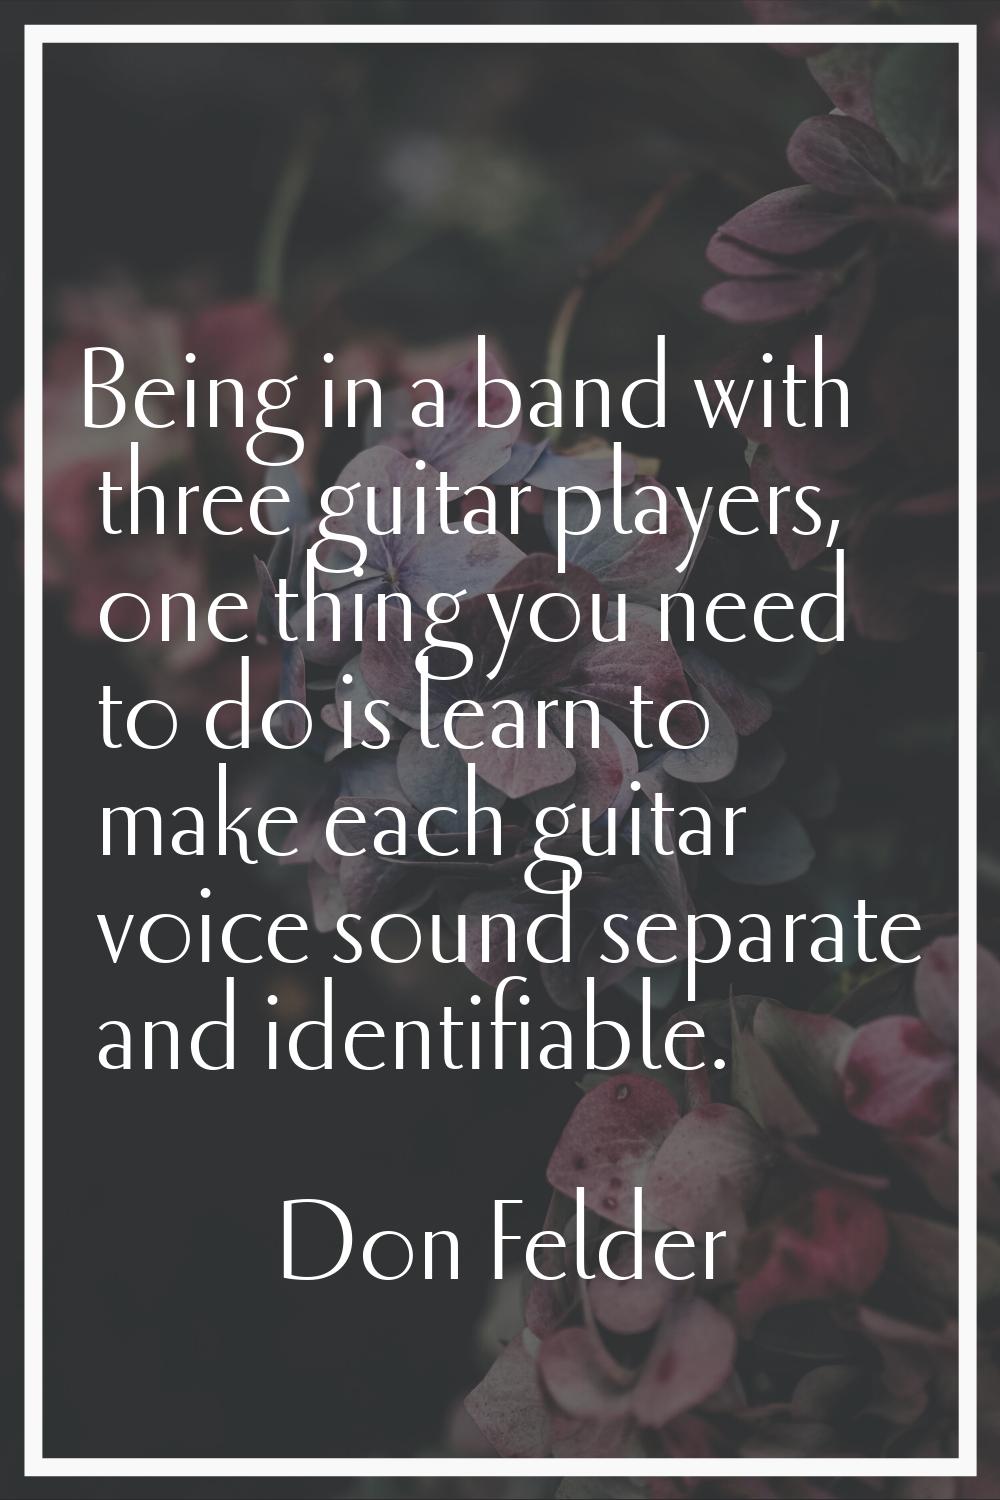 Being in a band with three guitar players, one thing you need to do is learn to make each guitar vo